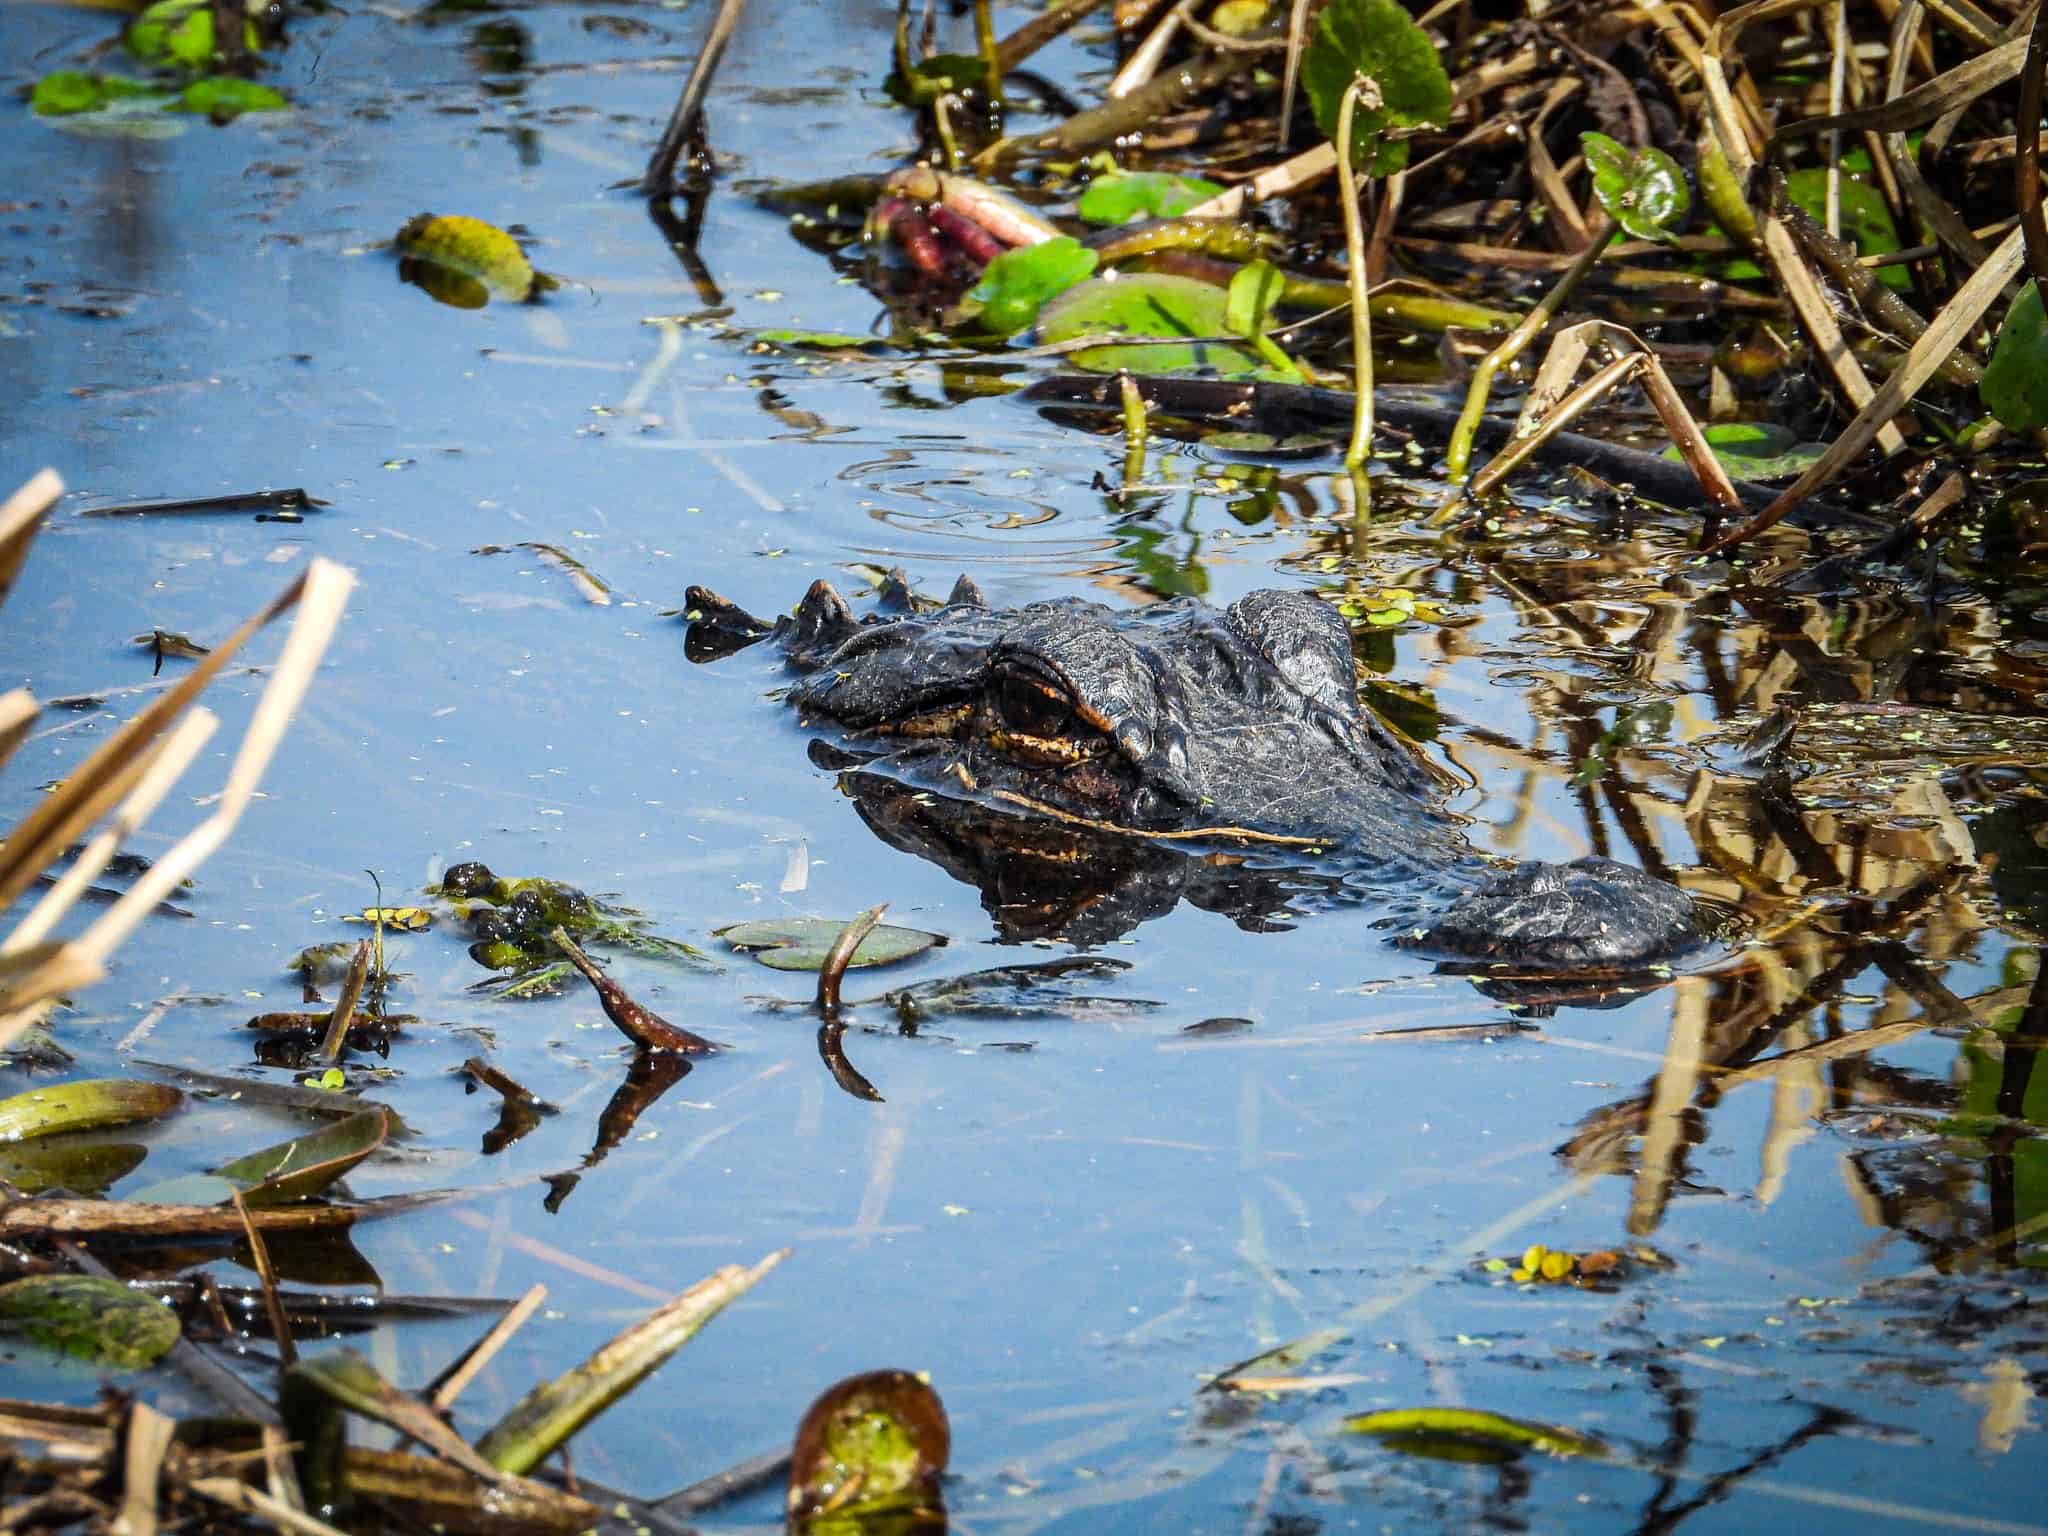 The Best Toddler-Friendly Things to Do in the Everglades